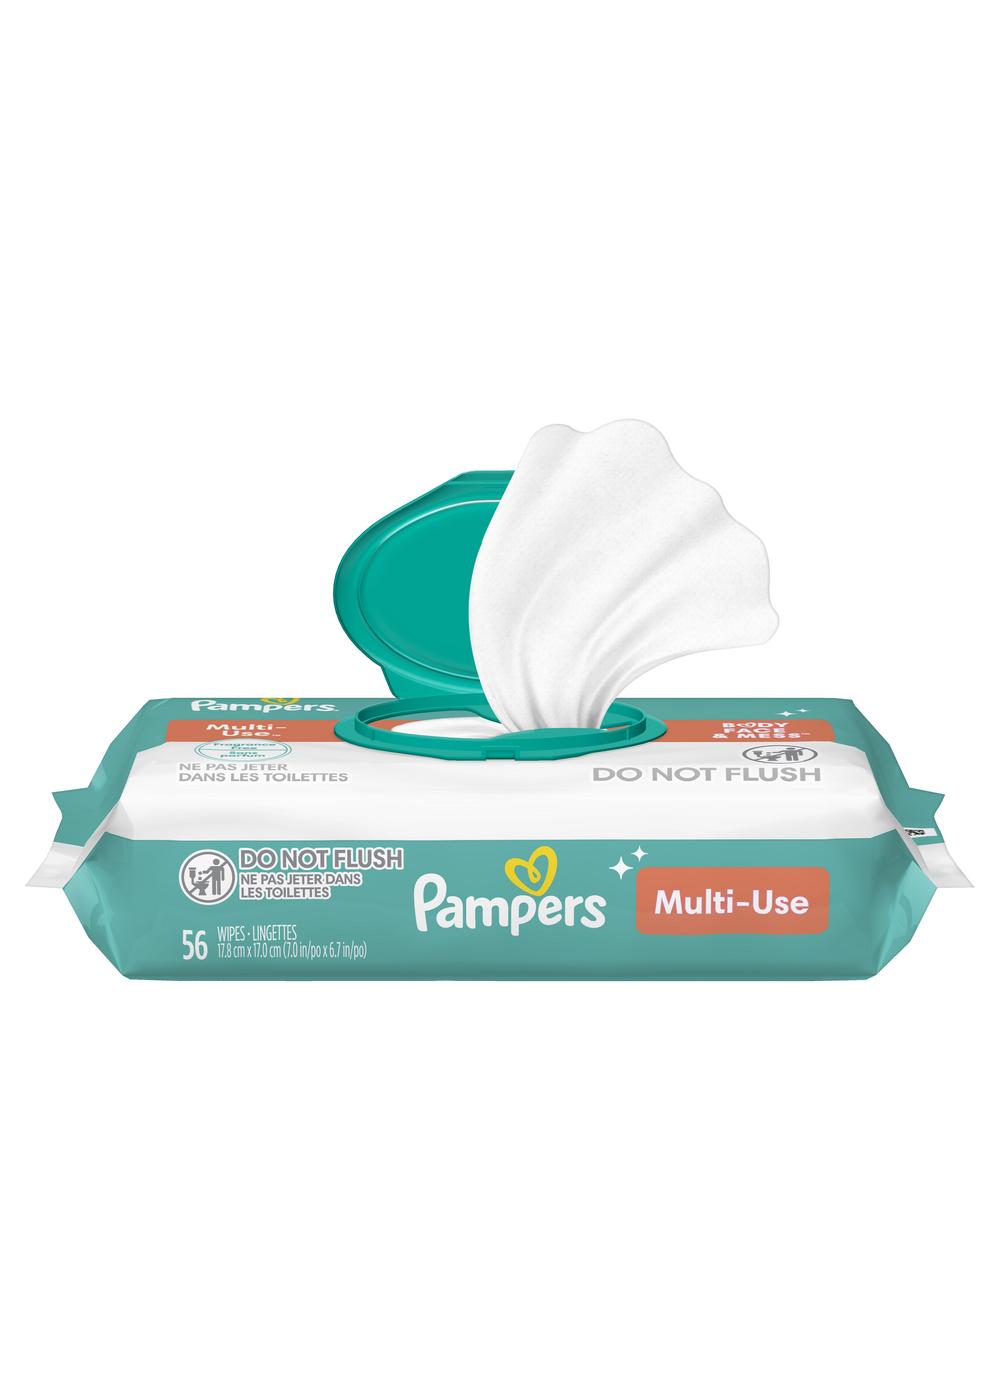 Pampers Multi-Use Baby Wipes - Fragrance Free; image 1 of 7